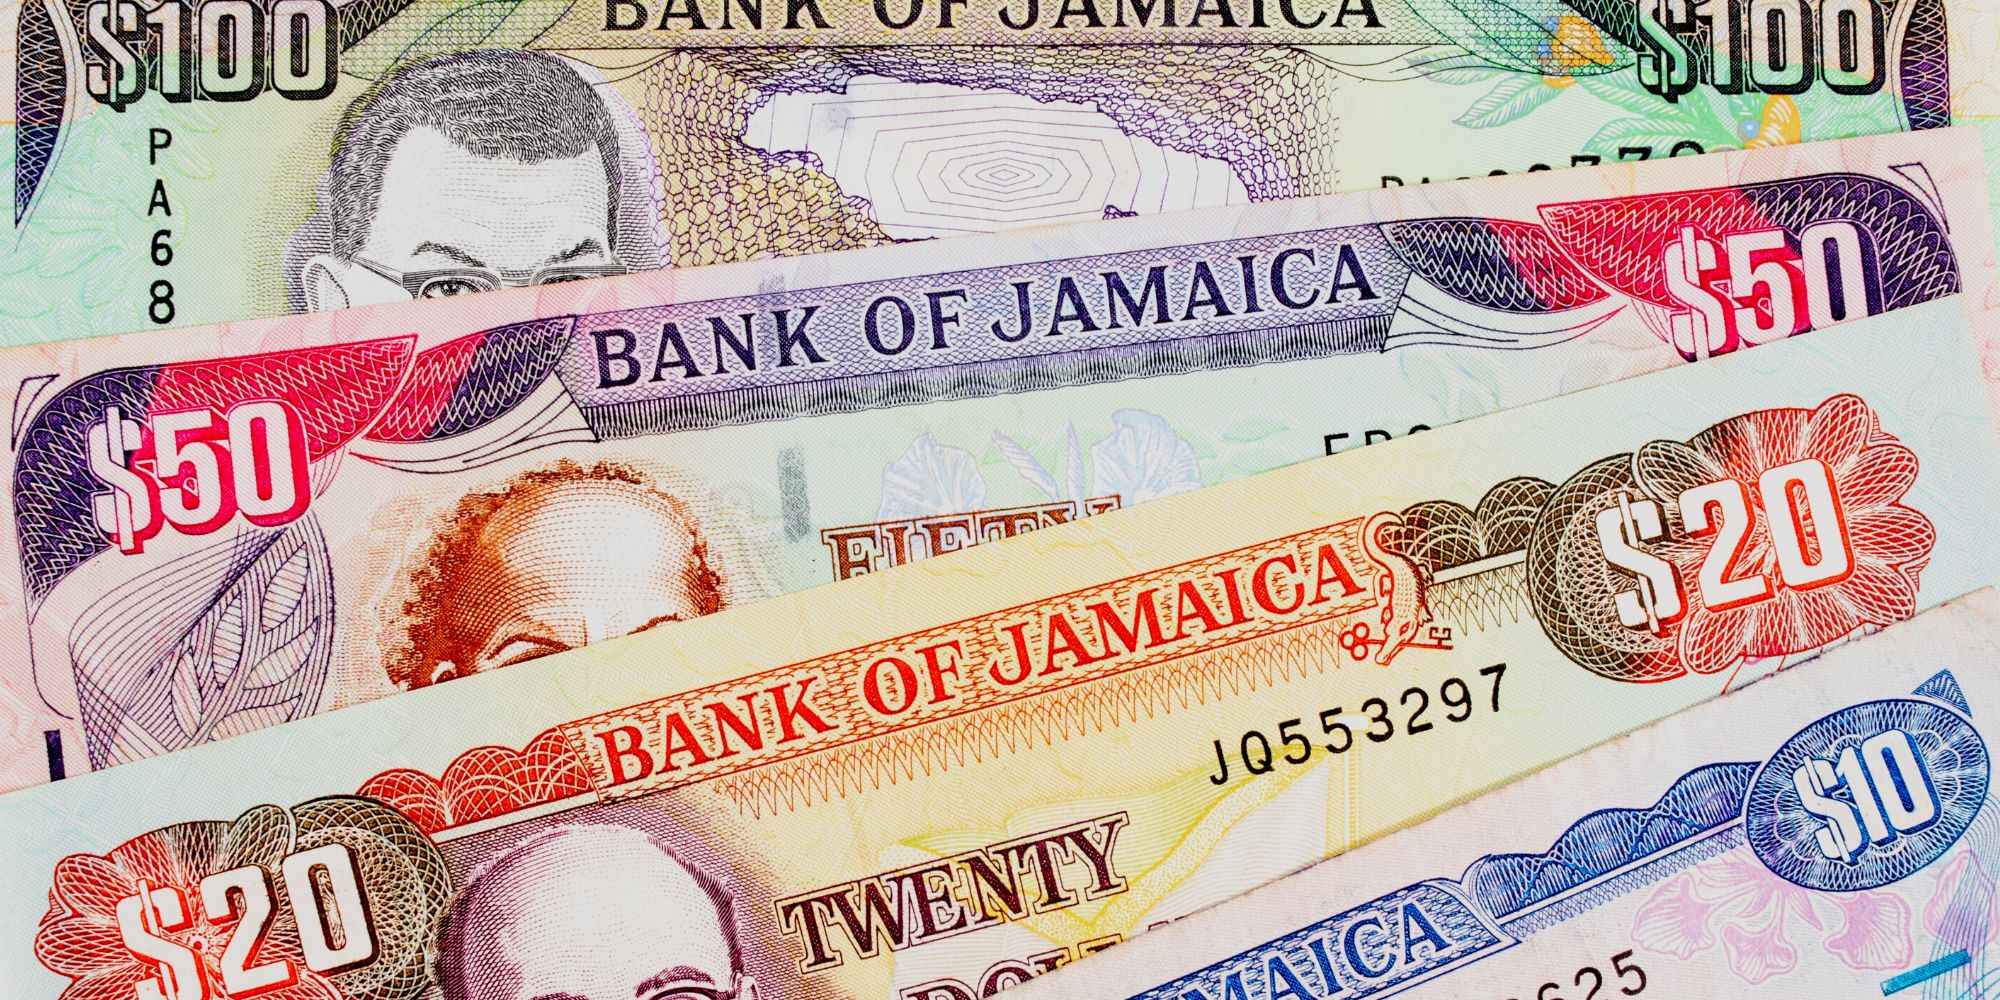 What Currency Is Used in Jamaica?